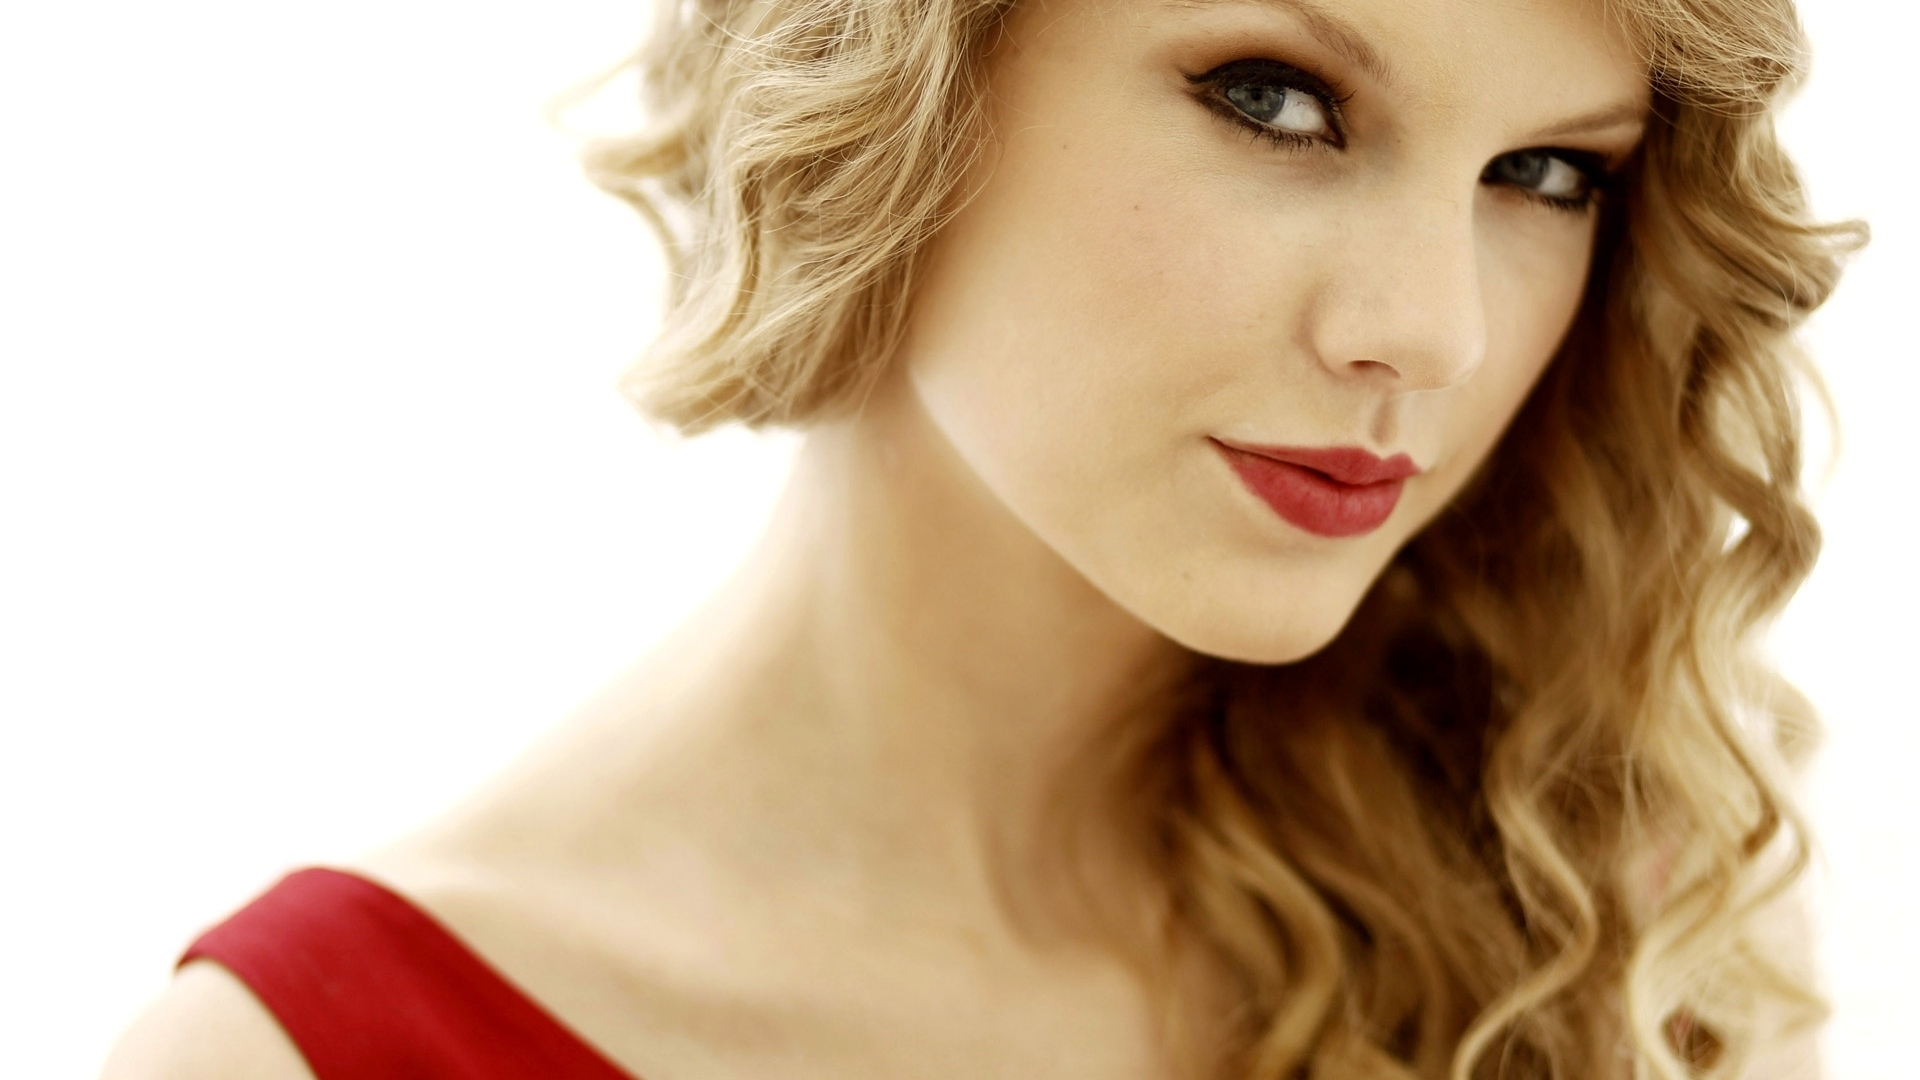 Taylor Swift 1080p Exclusive HD Wallpaper